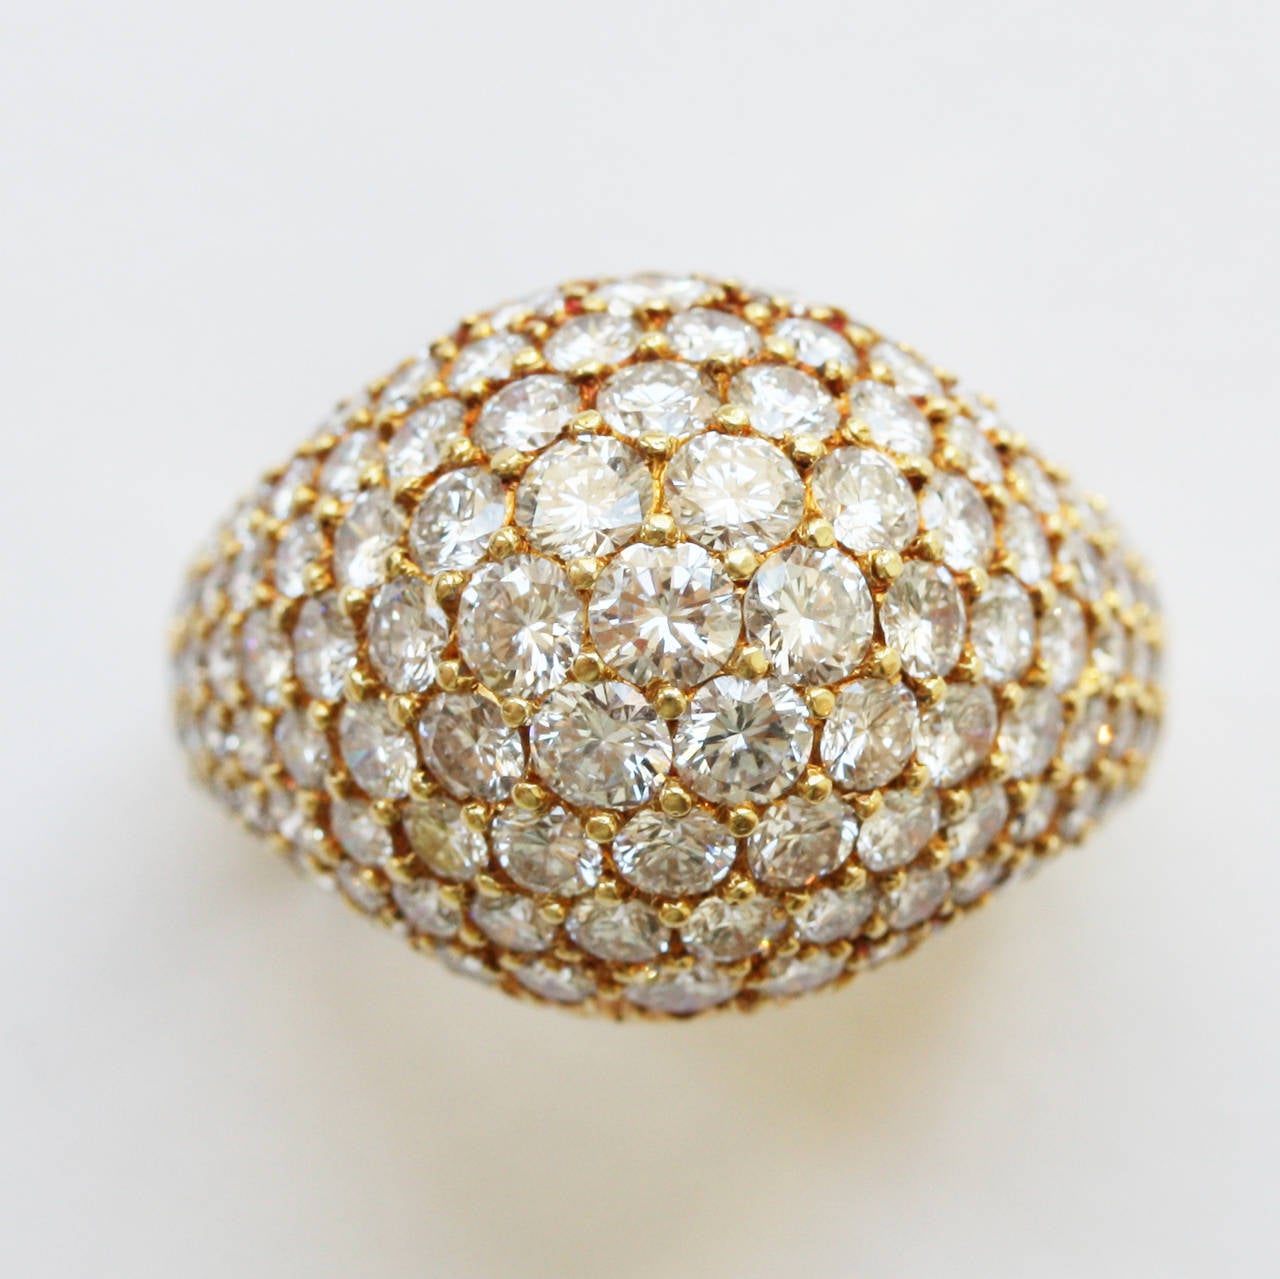 An 18 carat yellow gold bombé ring completely pavé set with brilliant cut diamonds (in total app. 3.5 carats) signed and numbered: Kurt Wayne for Cartier, 45623, 70487 41323, USA.

ring size: 17.25 mm. 6 3/4 US.
weight: 10.2 grams